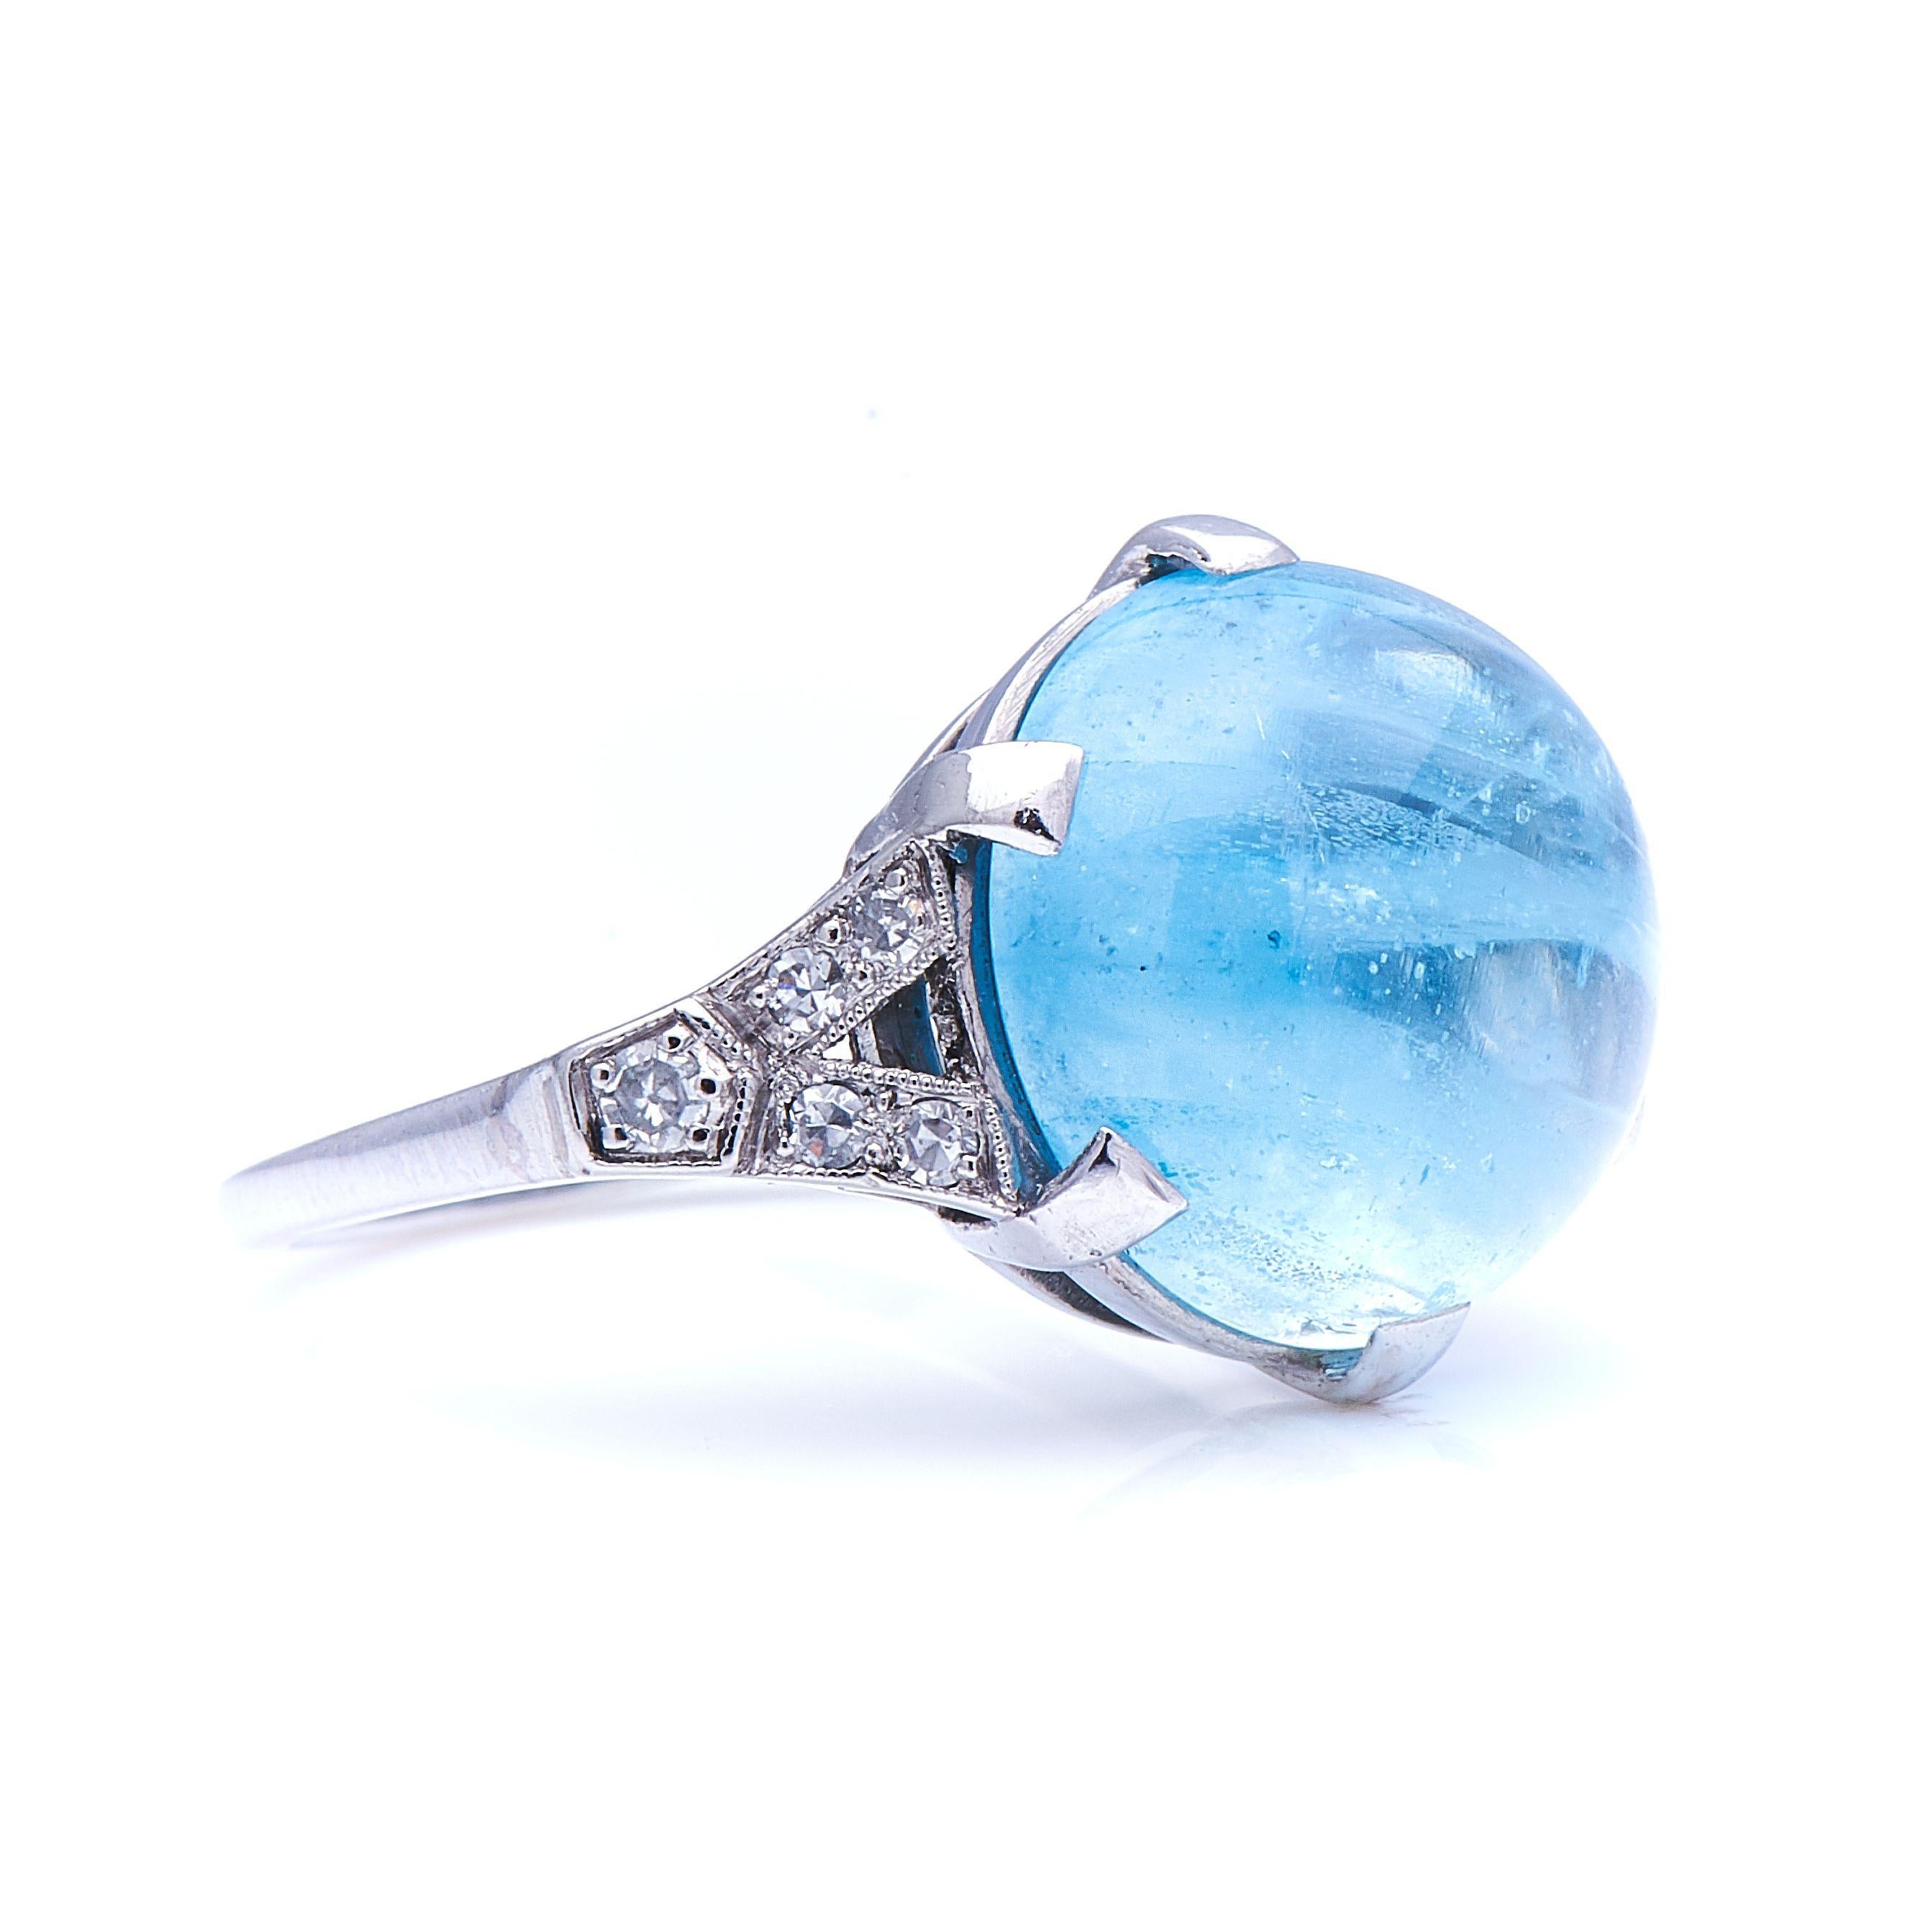 Aquamarine and diamond ring, first half 20th century. Aquamarine is a pale blue variety of the mineral beryl. Its colour has given its an historic association with water, and sailors considered it a lucky talisman at sea, ensuring calm waters on